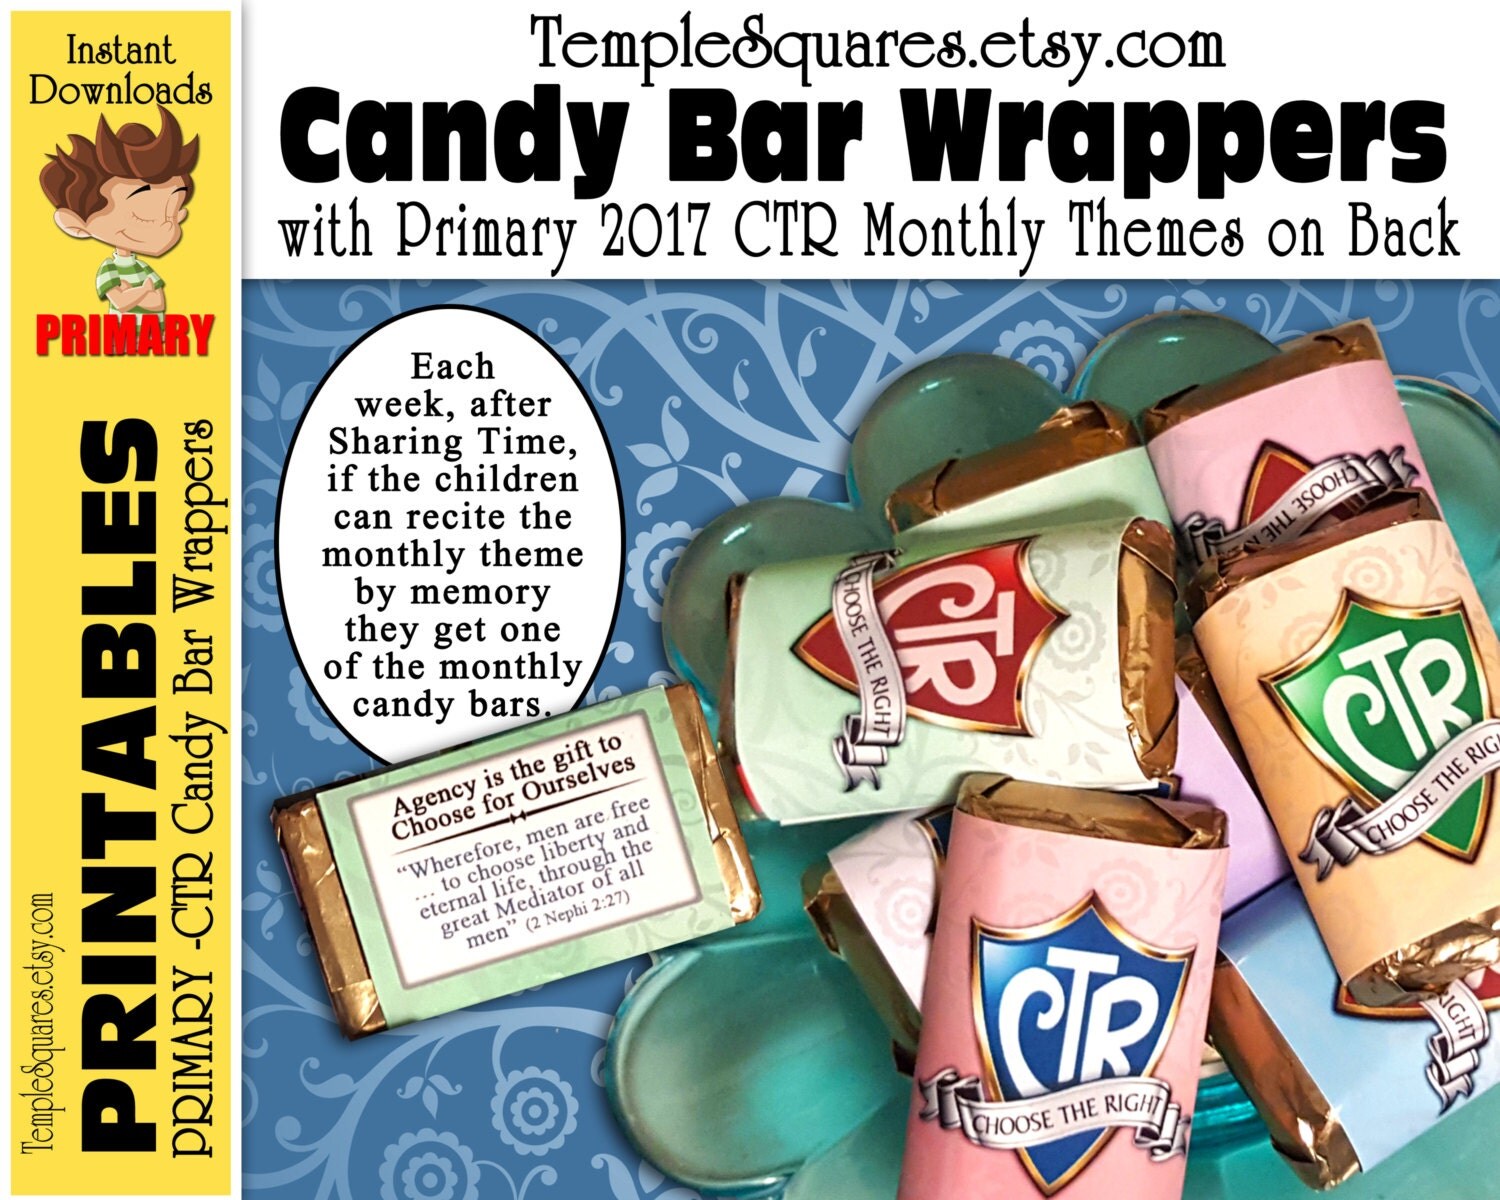 my candybar wrappers sale